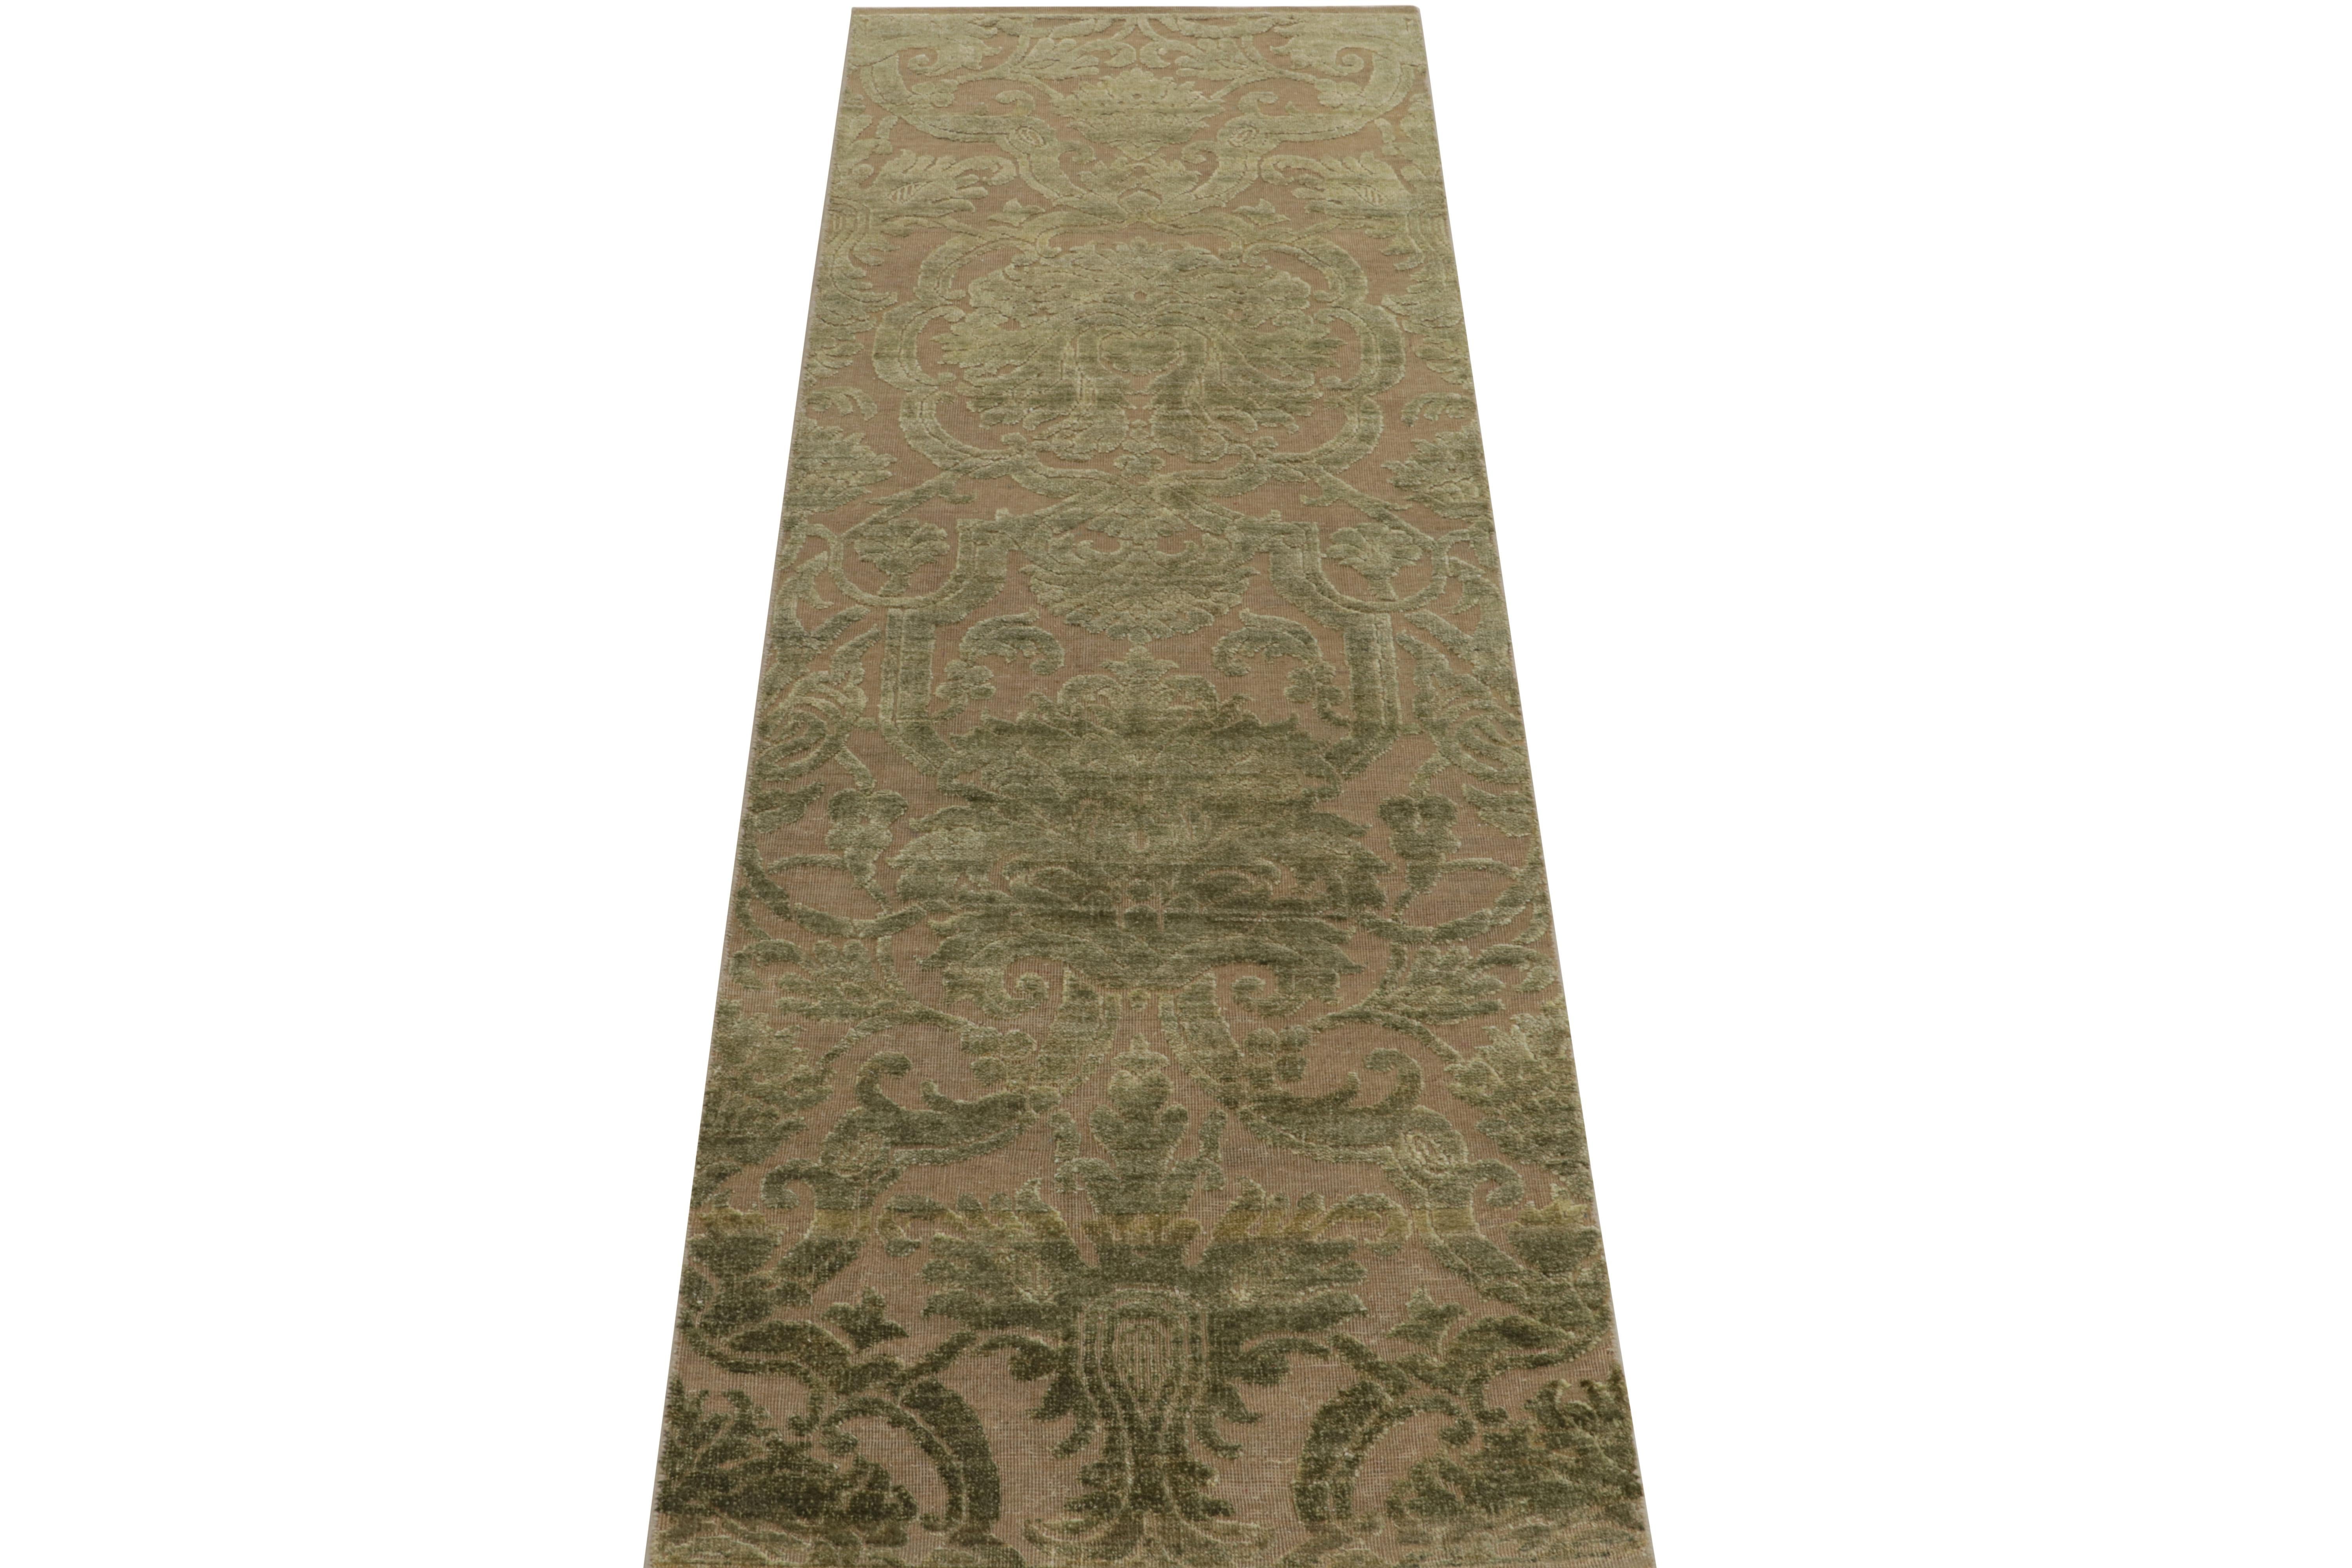 Handknotted in a fine blend of wool and silk, this 3x8 contemporary runner from our Modern Classics collection recaptures European sensibilities of the 18th century. The classic inspiration unfolds with an all over floral pattern in luscious green